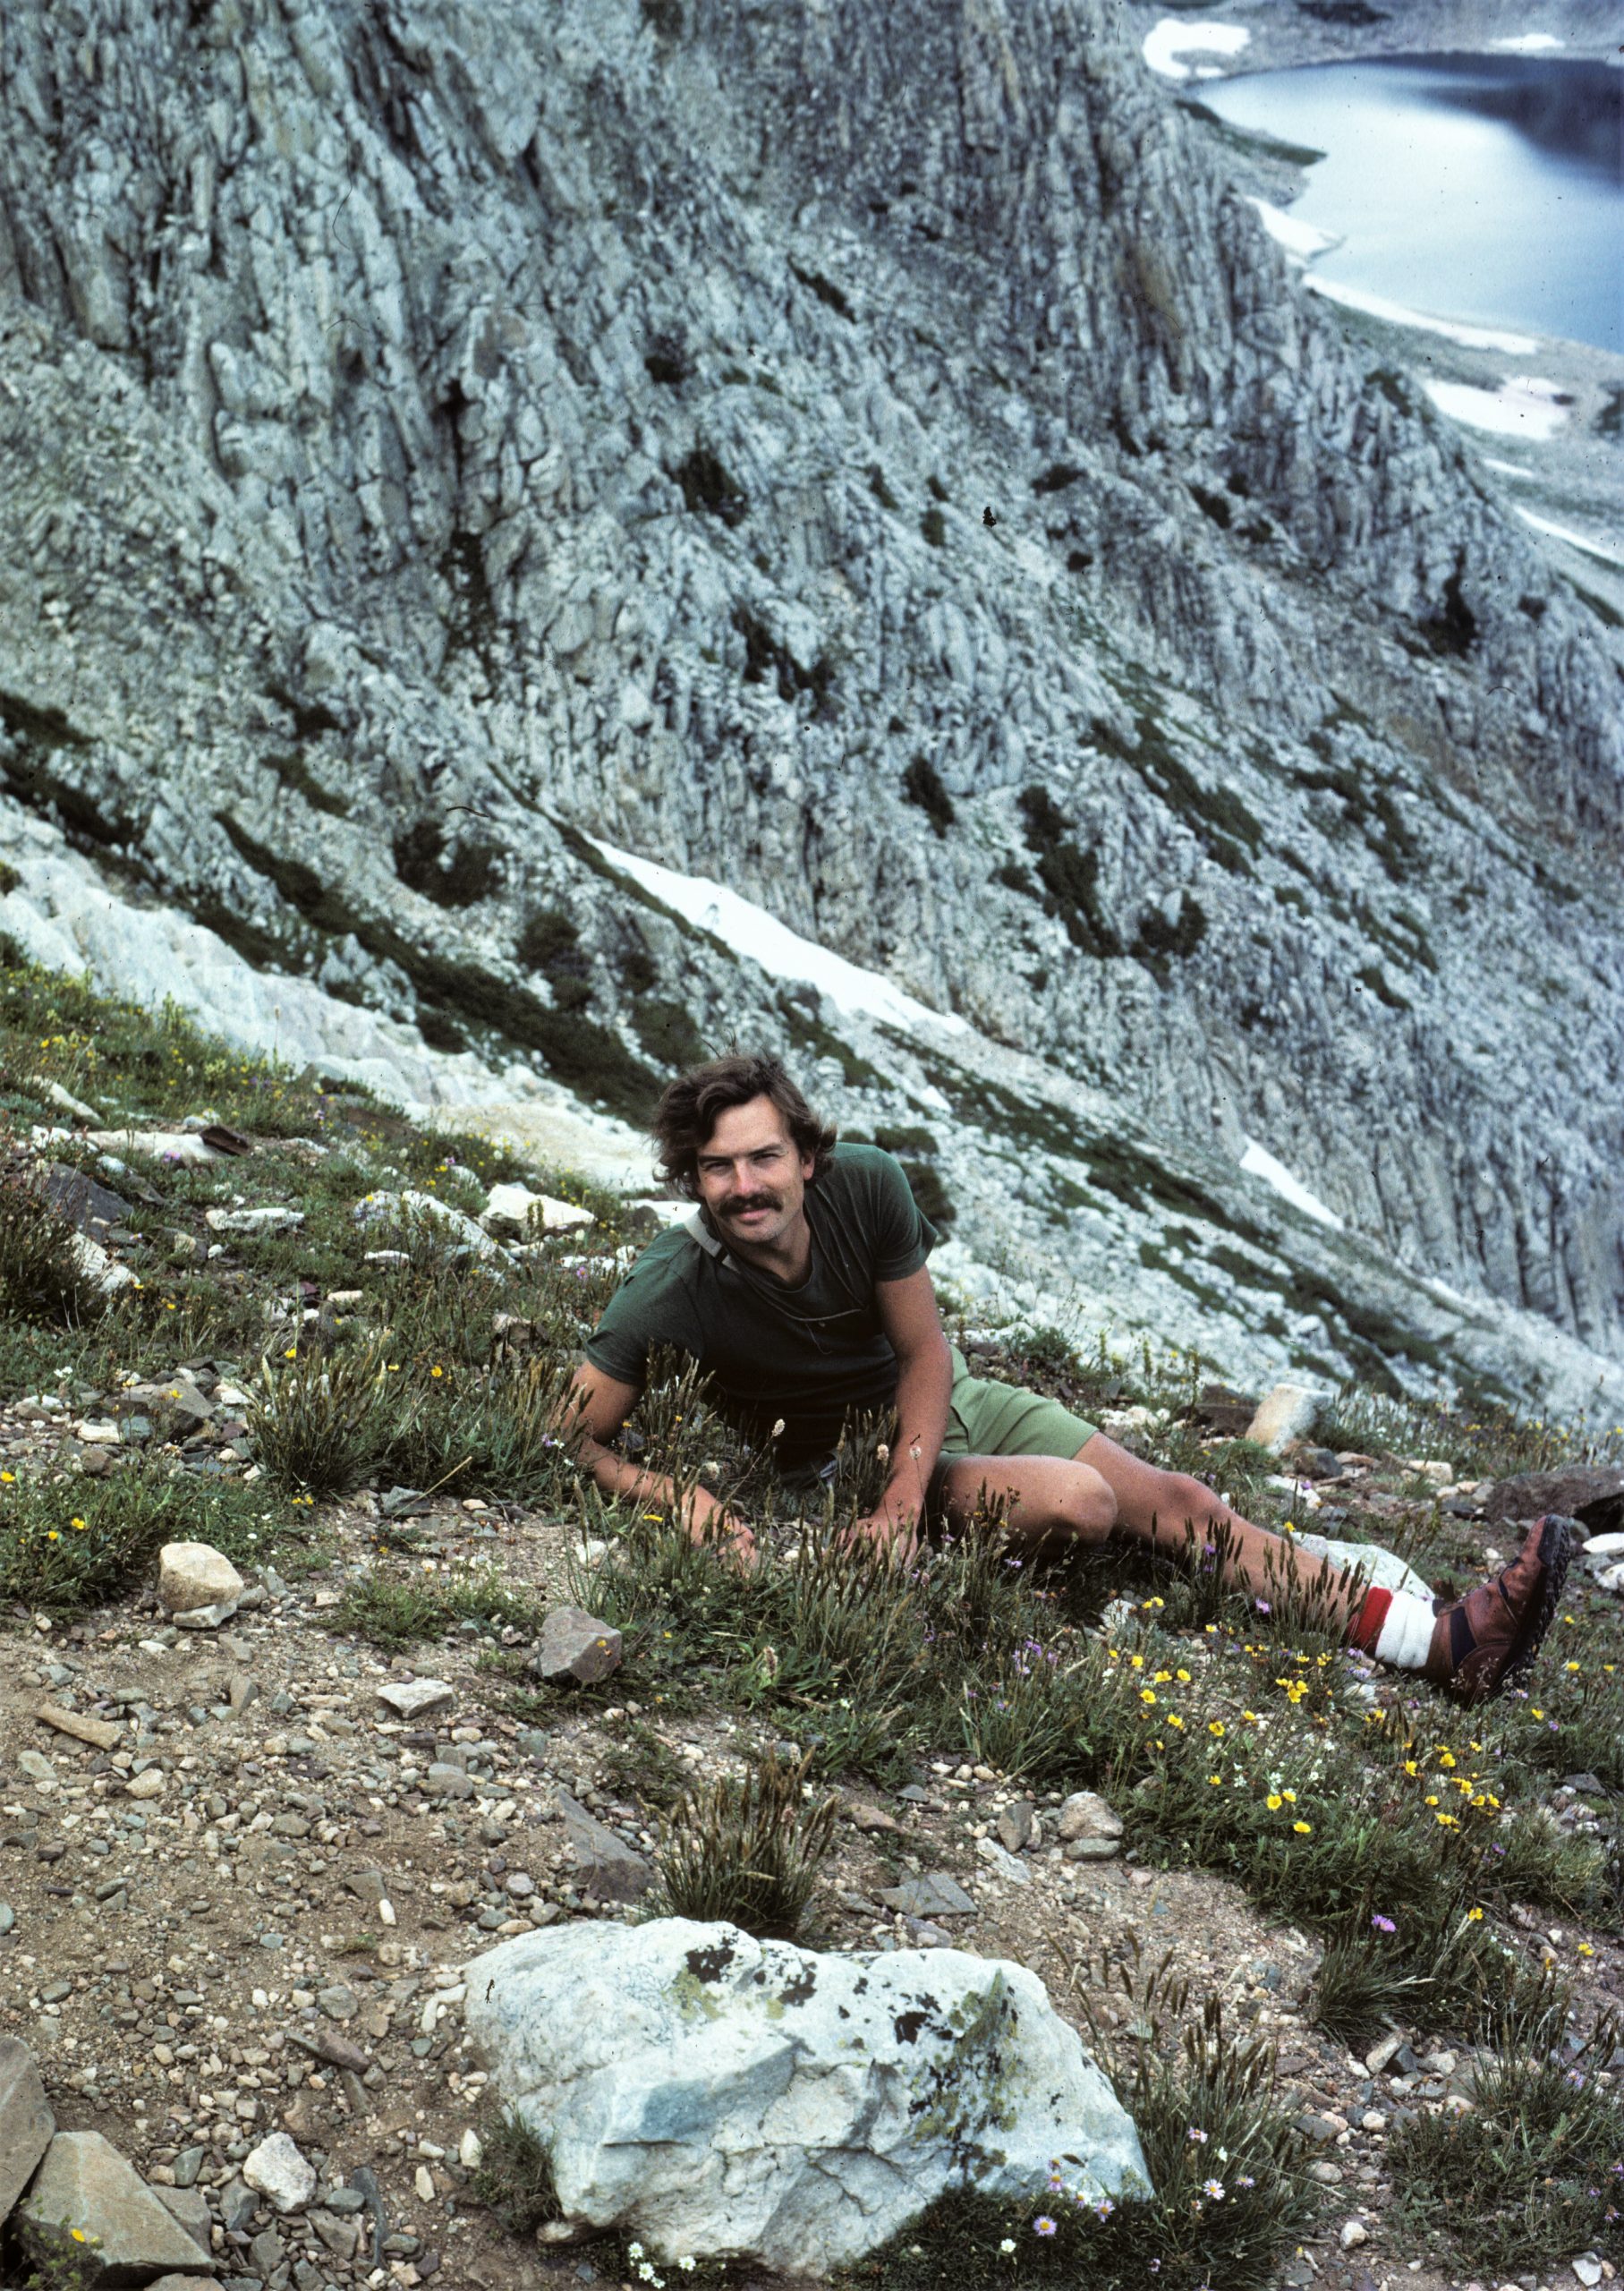 Johnny in the Colorado Rockies in the days of his academic career.